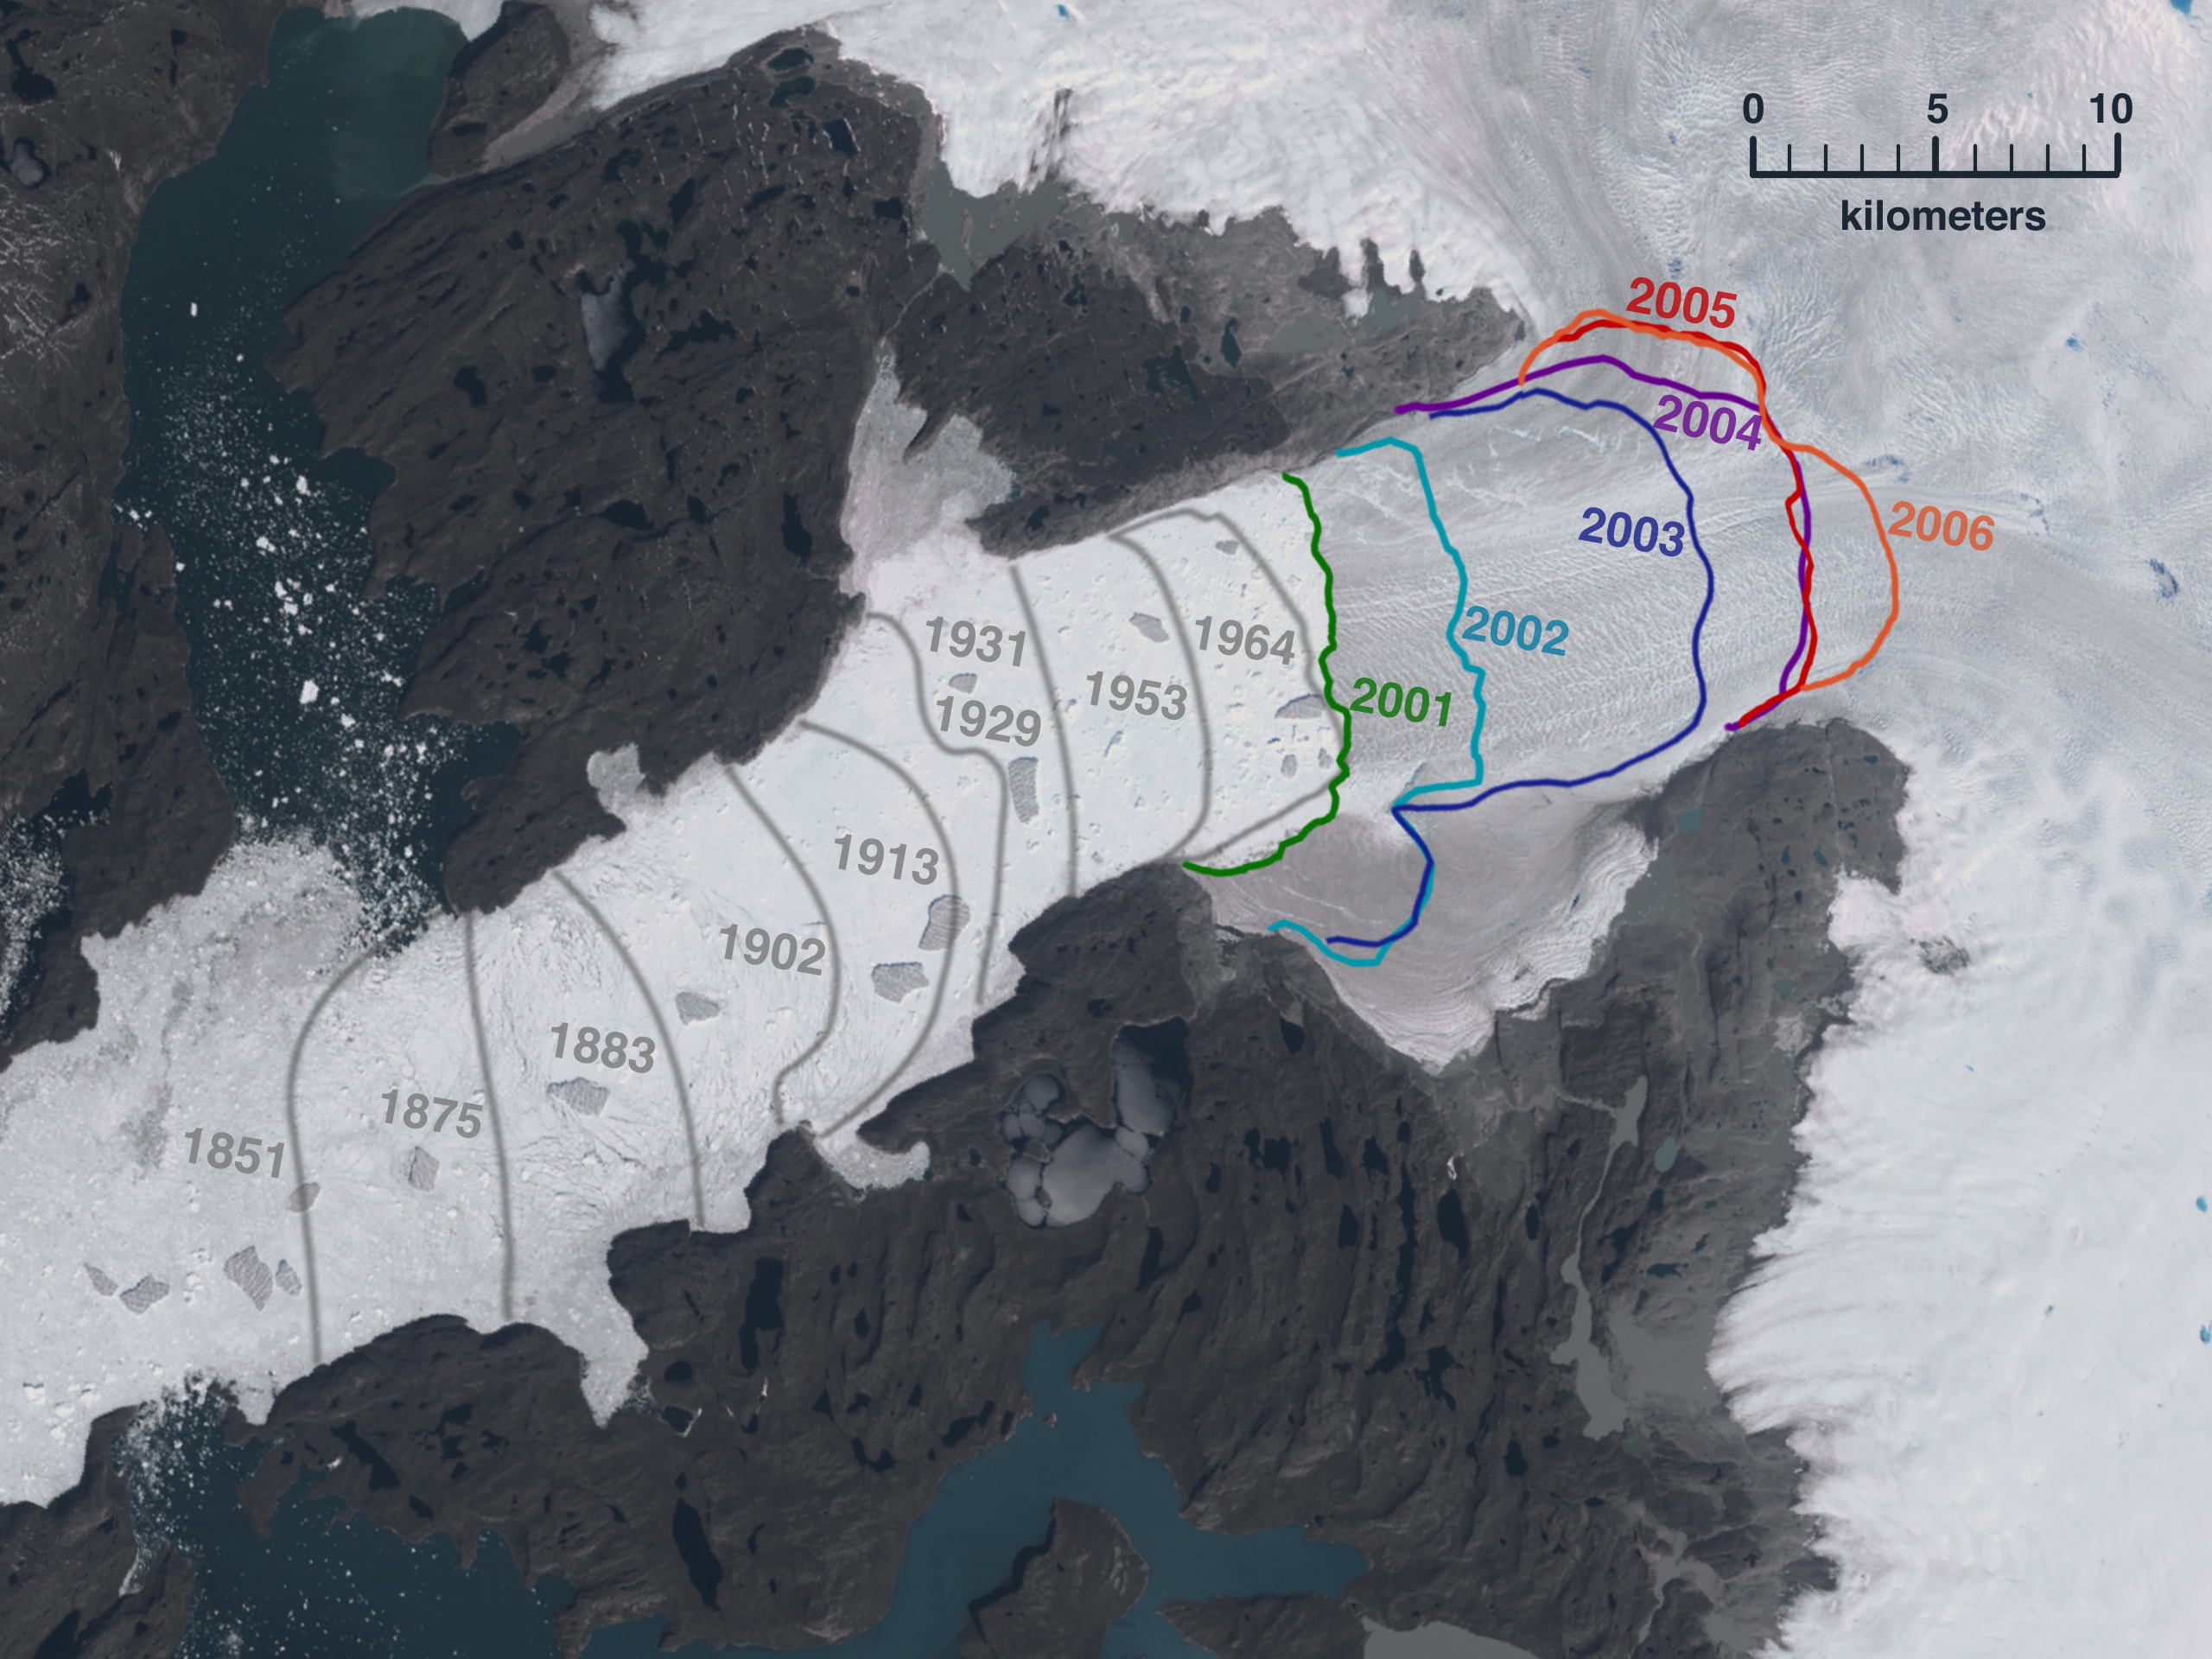  This image of the Jakobshavn glacier on 07/07/2001 shows the  changes in the glacier's calving front between 1851 and 2006.  Historic calving front locations, 1851 through 1964, were compiled by Anker Weidick and Ole Bennike and are shown here in gray.  Recent calving front locations, 2001 through 2006, derived from satellite imagery are show in colors.  A distance scale is provided.